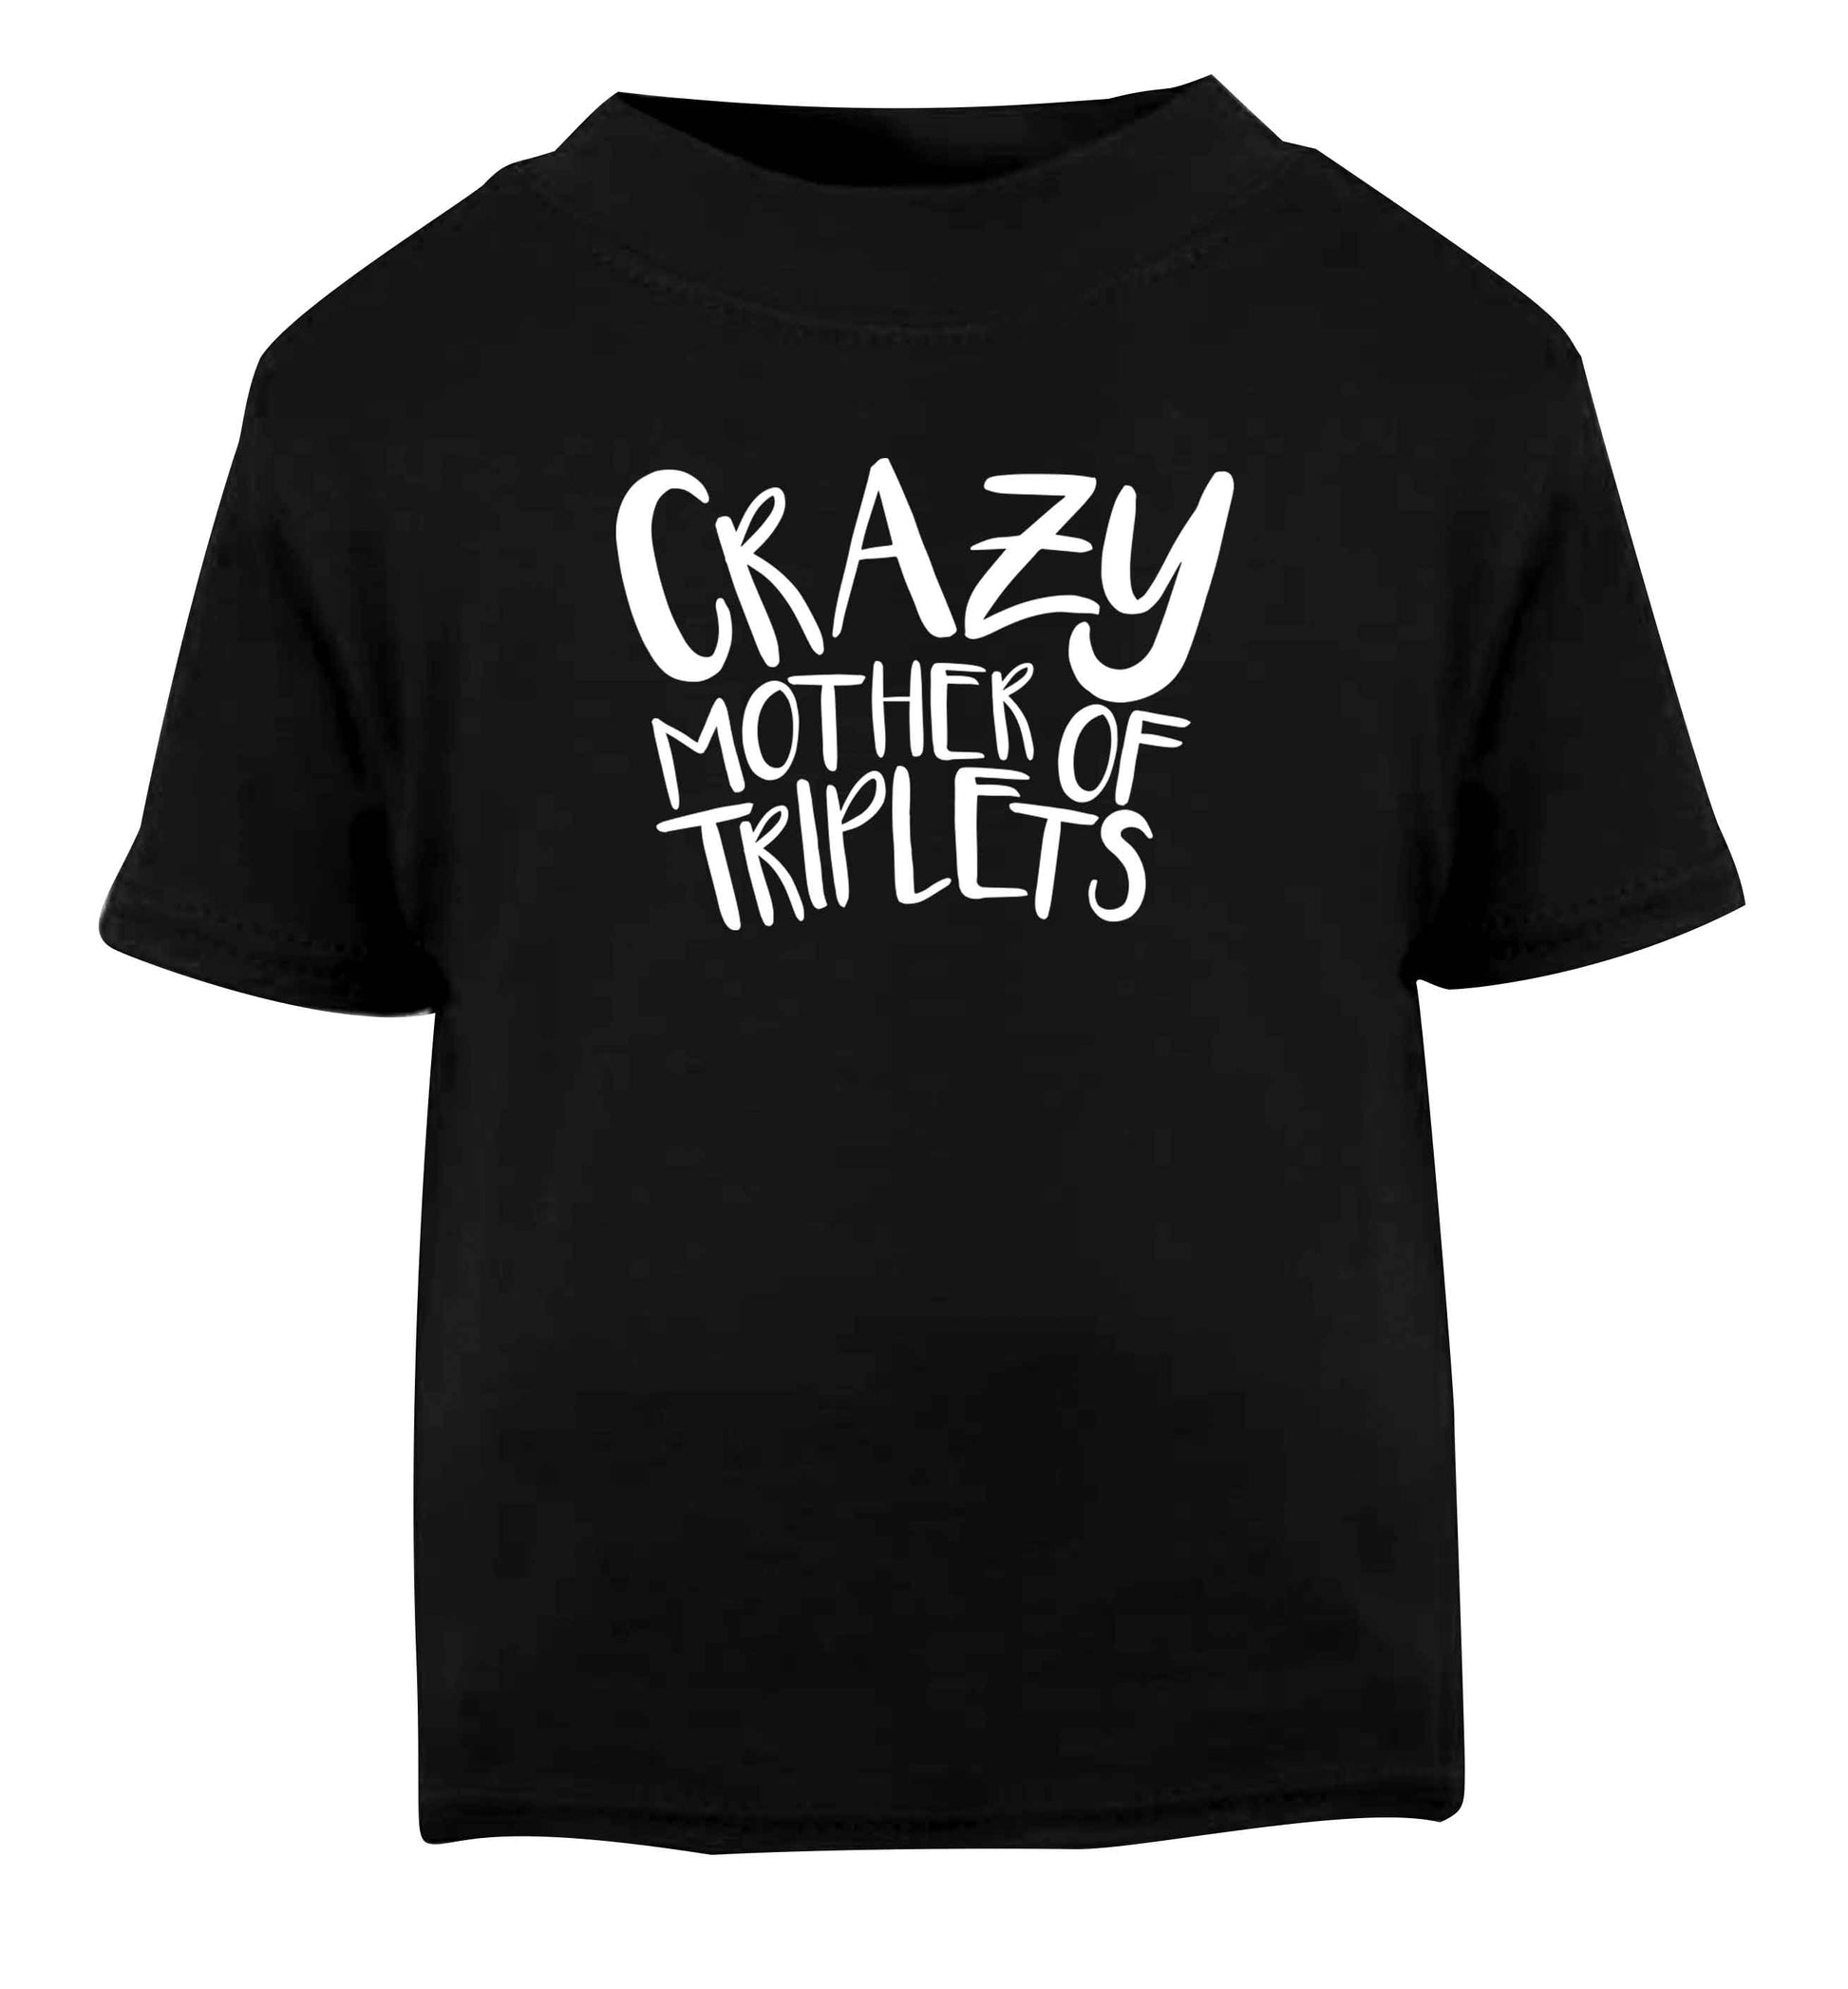 Crazy mother of triplets Black baby toddler Tshirt 2 years